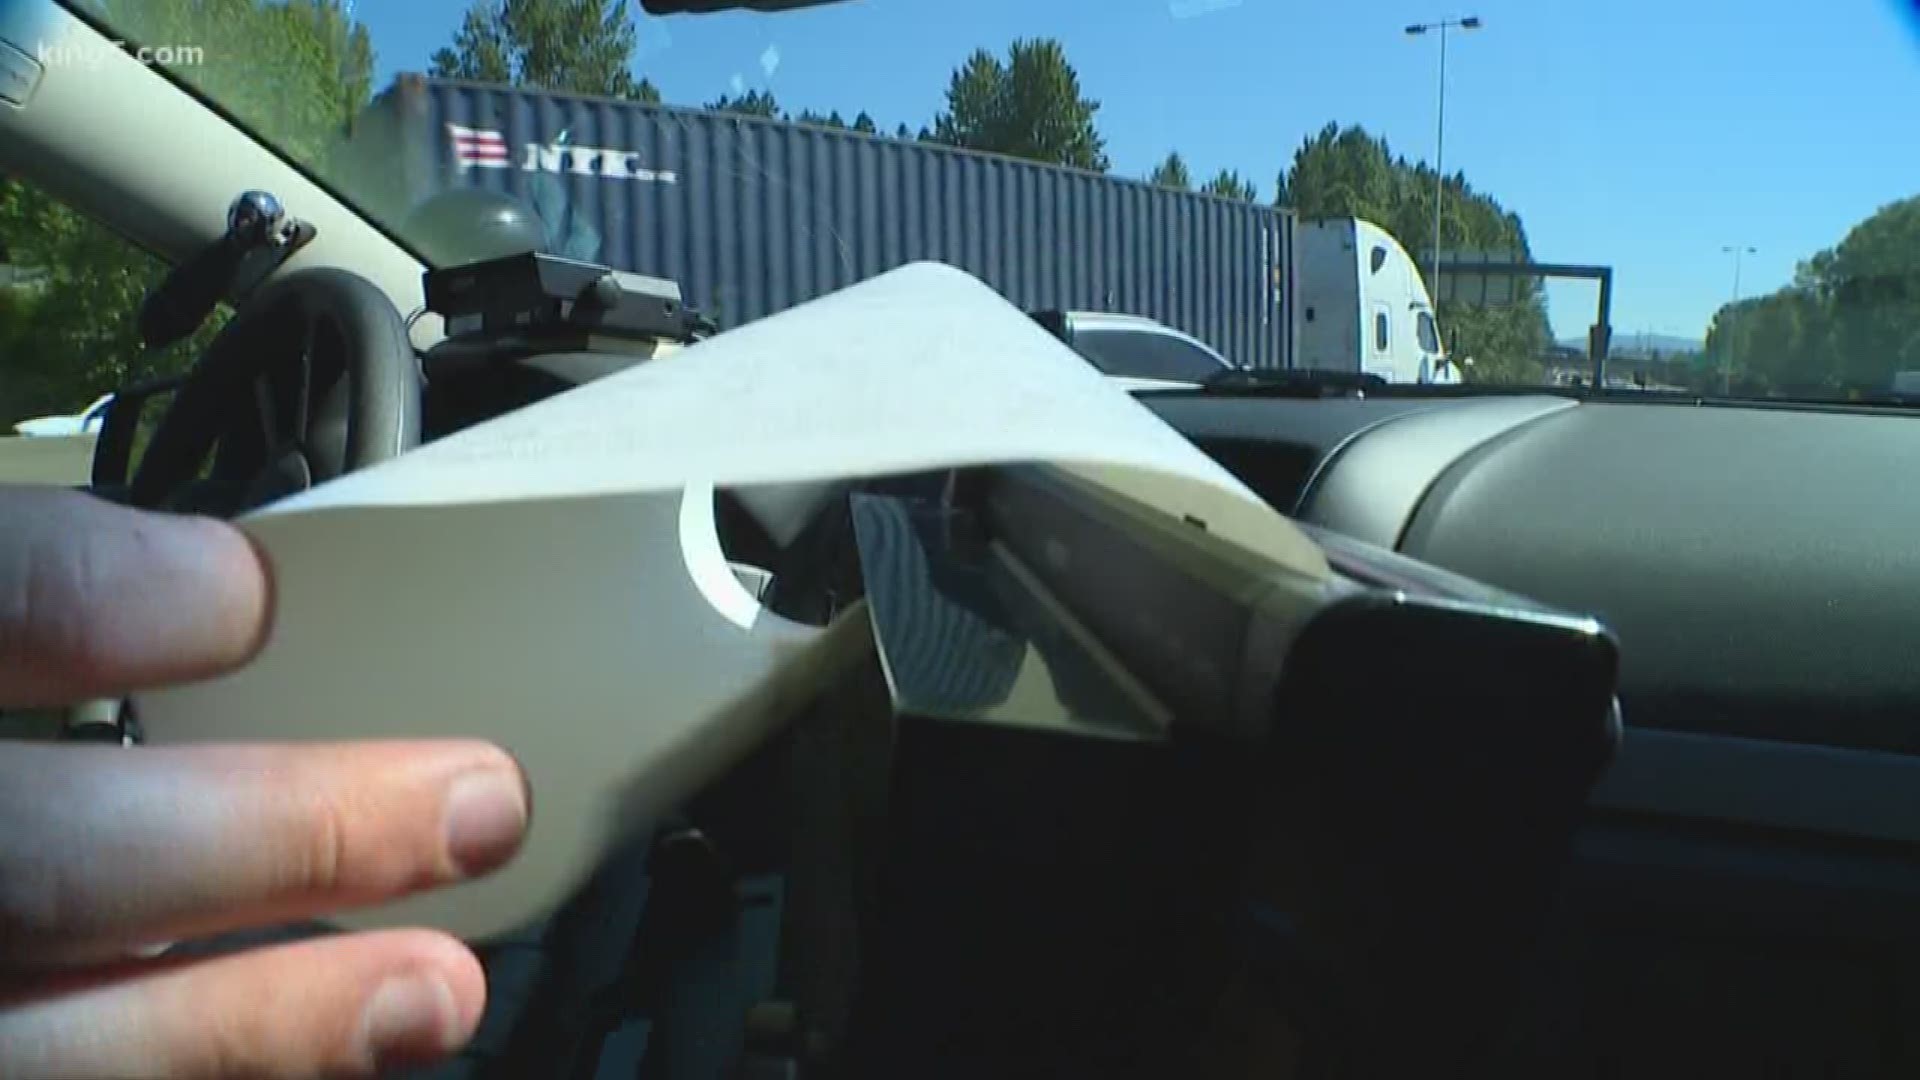 Think you can get away with driving solo in a HOV lane? Think again. Fines go up this weekend for anyone caught trying to cheat the system and repeat offenders will have to pay extra. KING 5’s Ted Land reports.